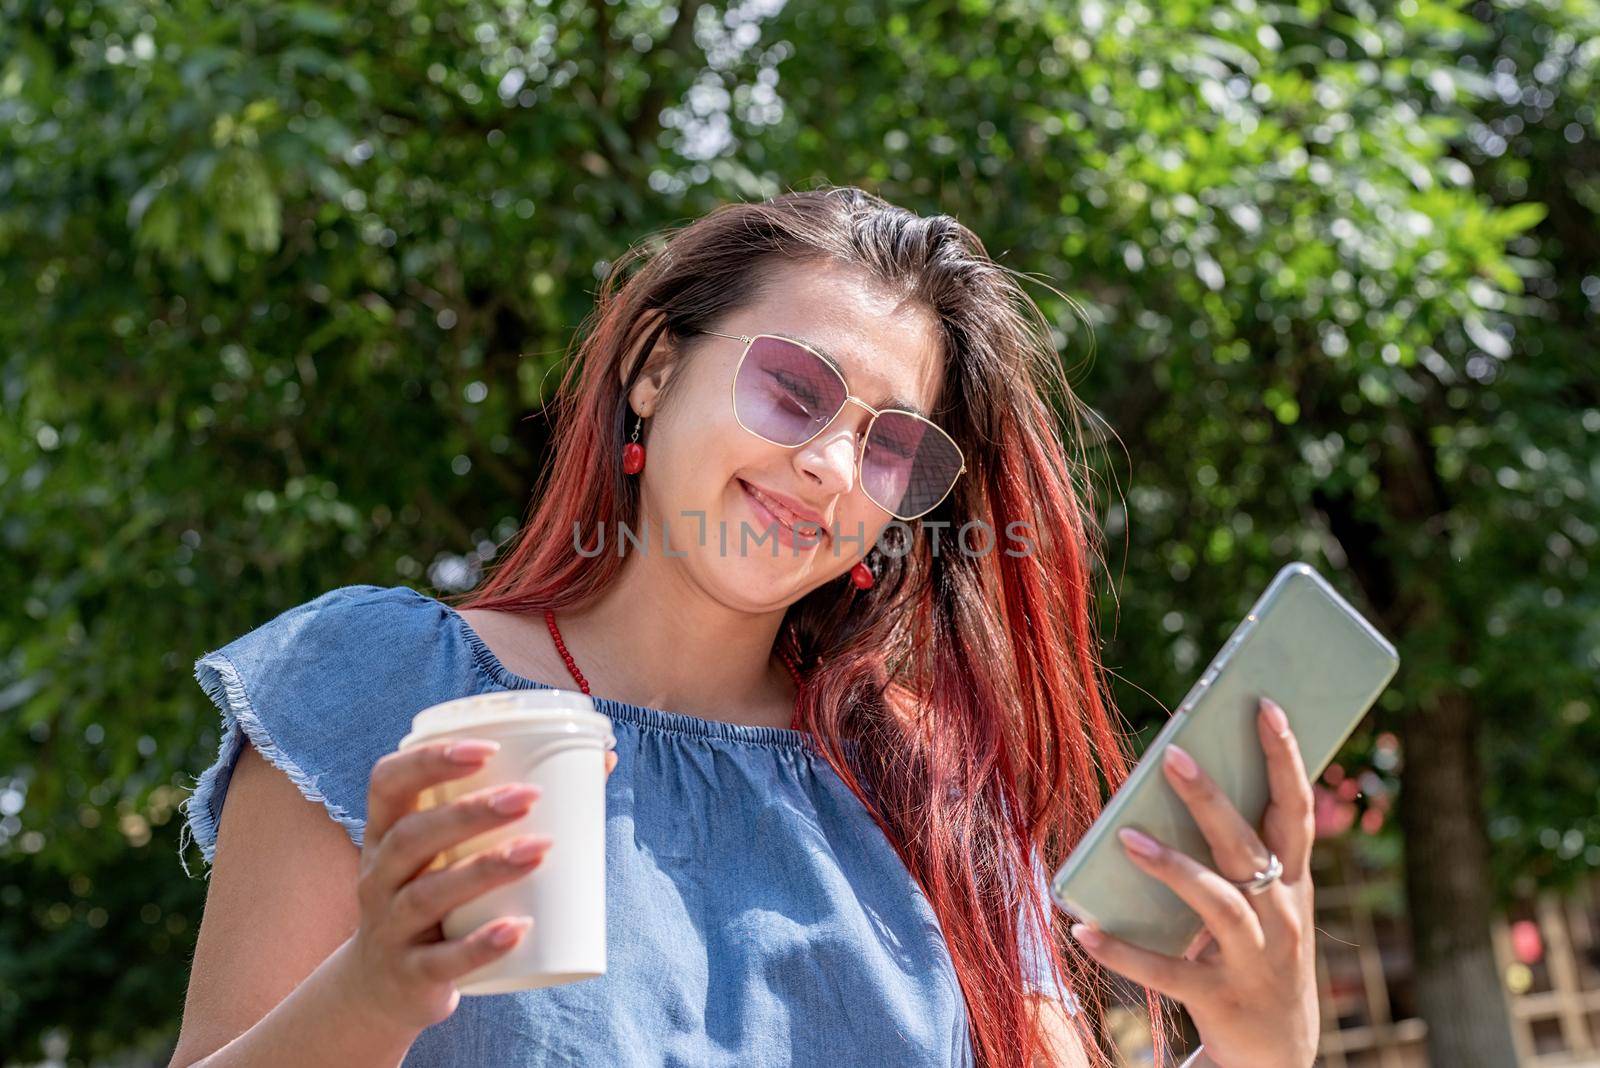 Attractive young woman in summer clothes and sunglasses holding cup of coffee in her hands,using smartphone videocall while sitting on bench in the park